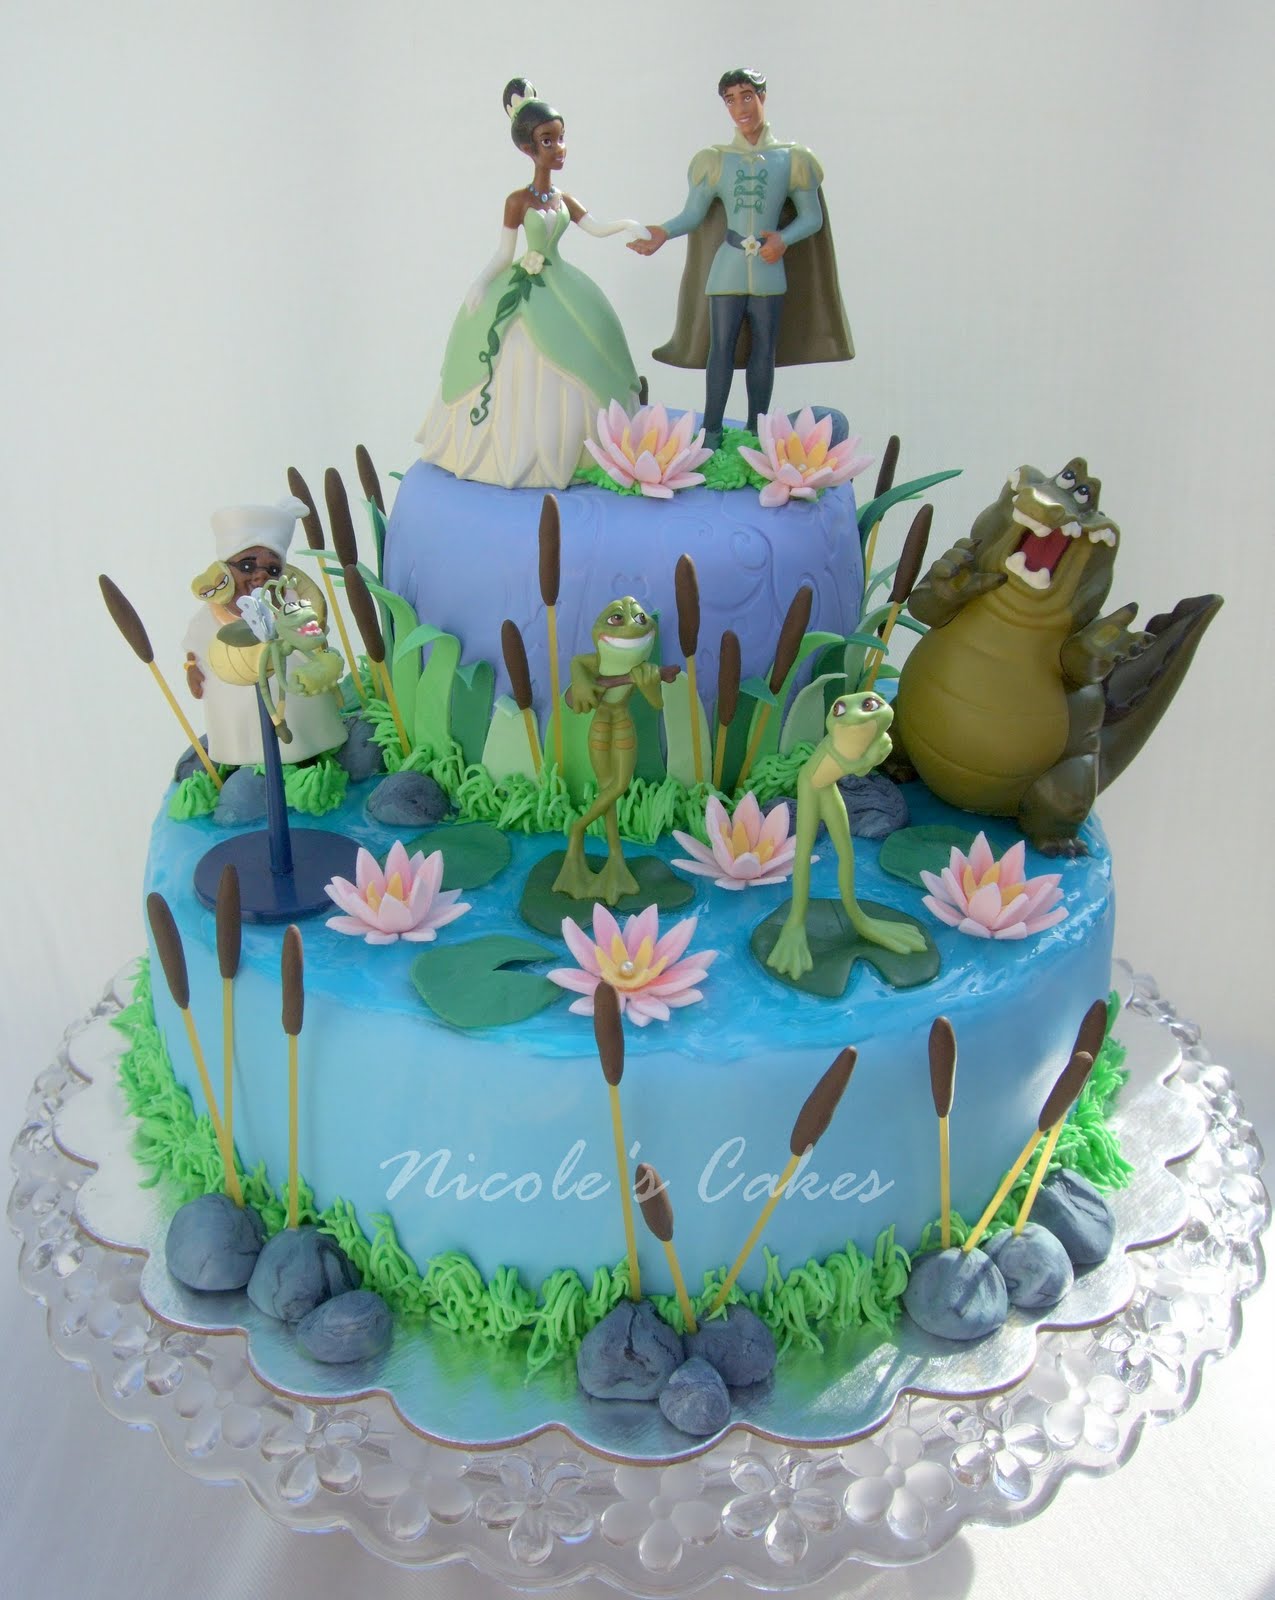 On Birthday Cakes The Princess and the Frog!